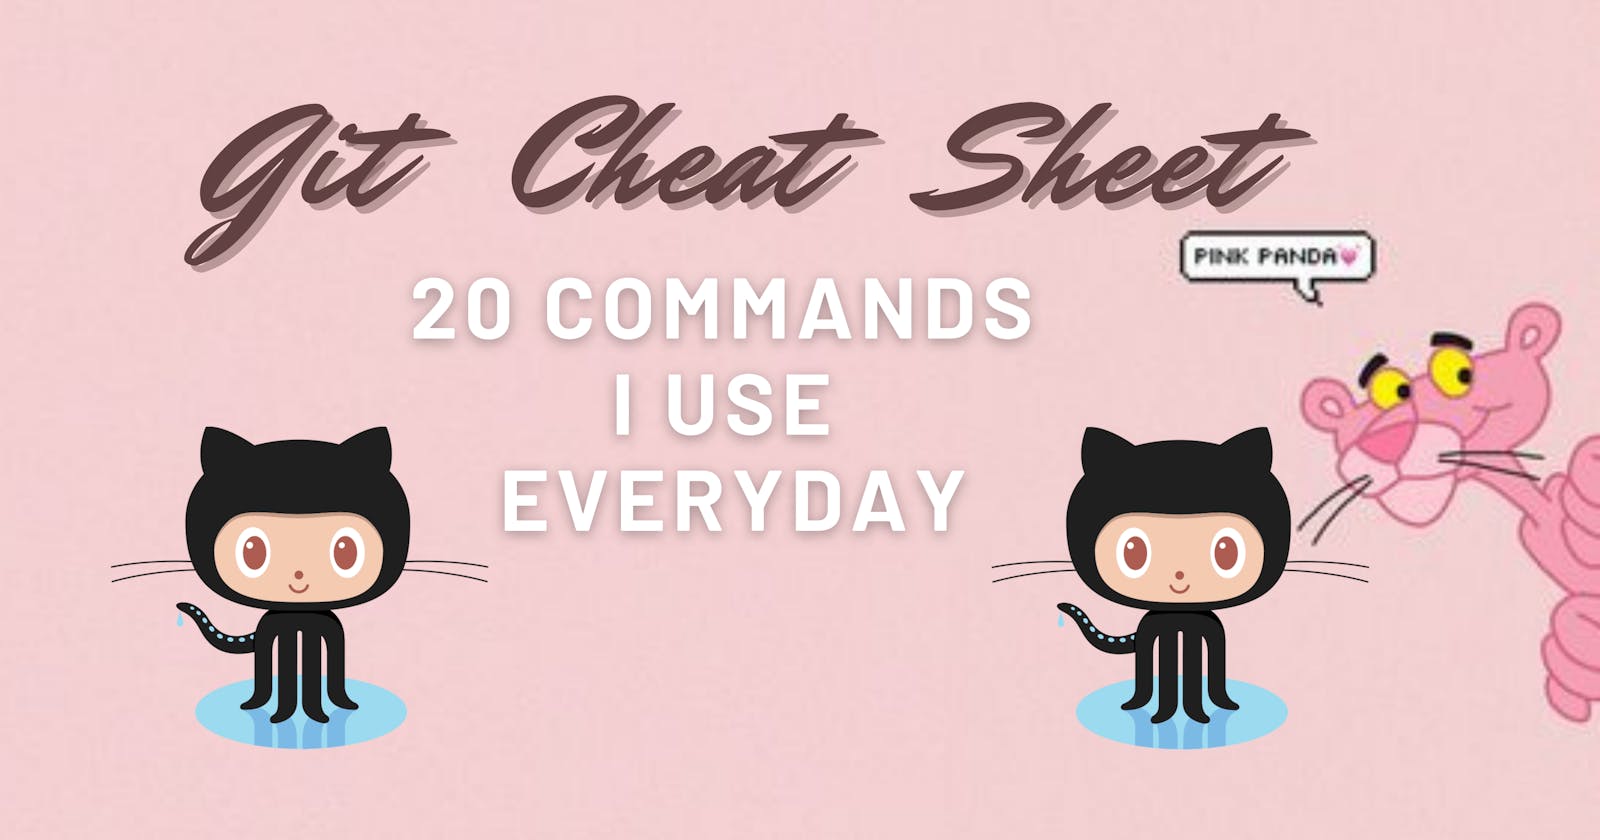 Git Cheat Sheet - 20 Commands I use Every Day